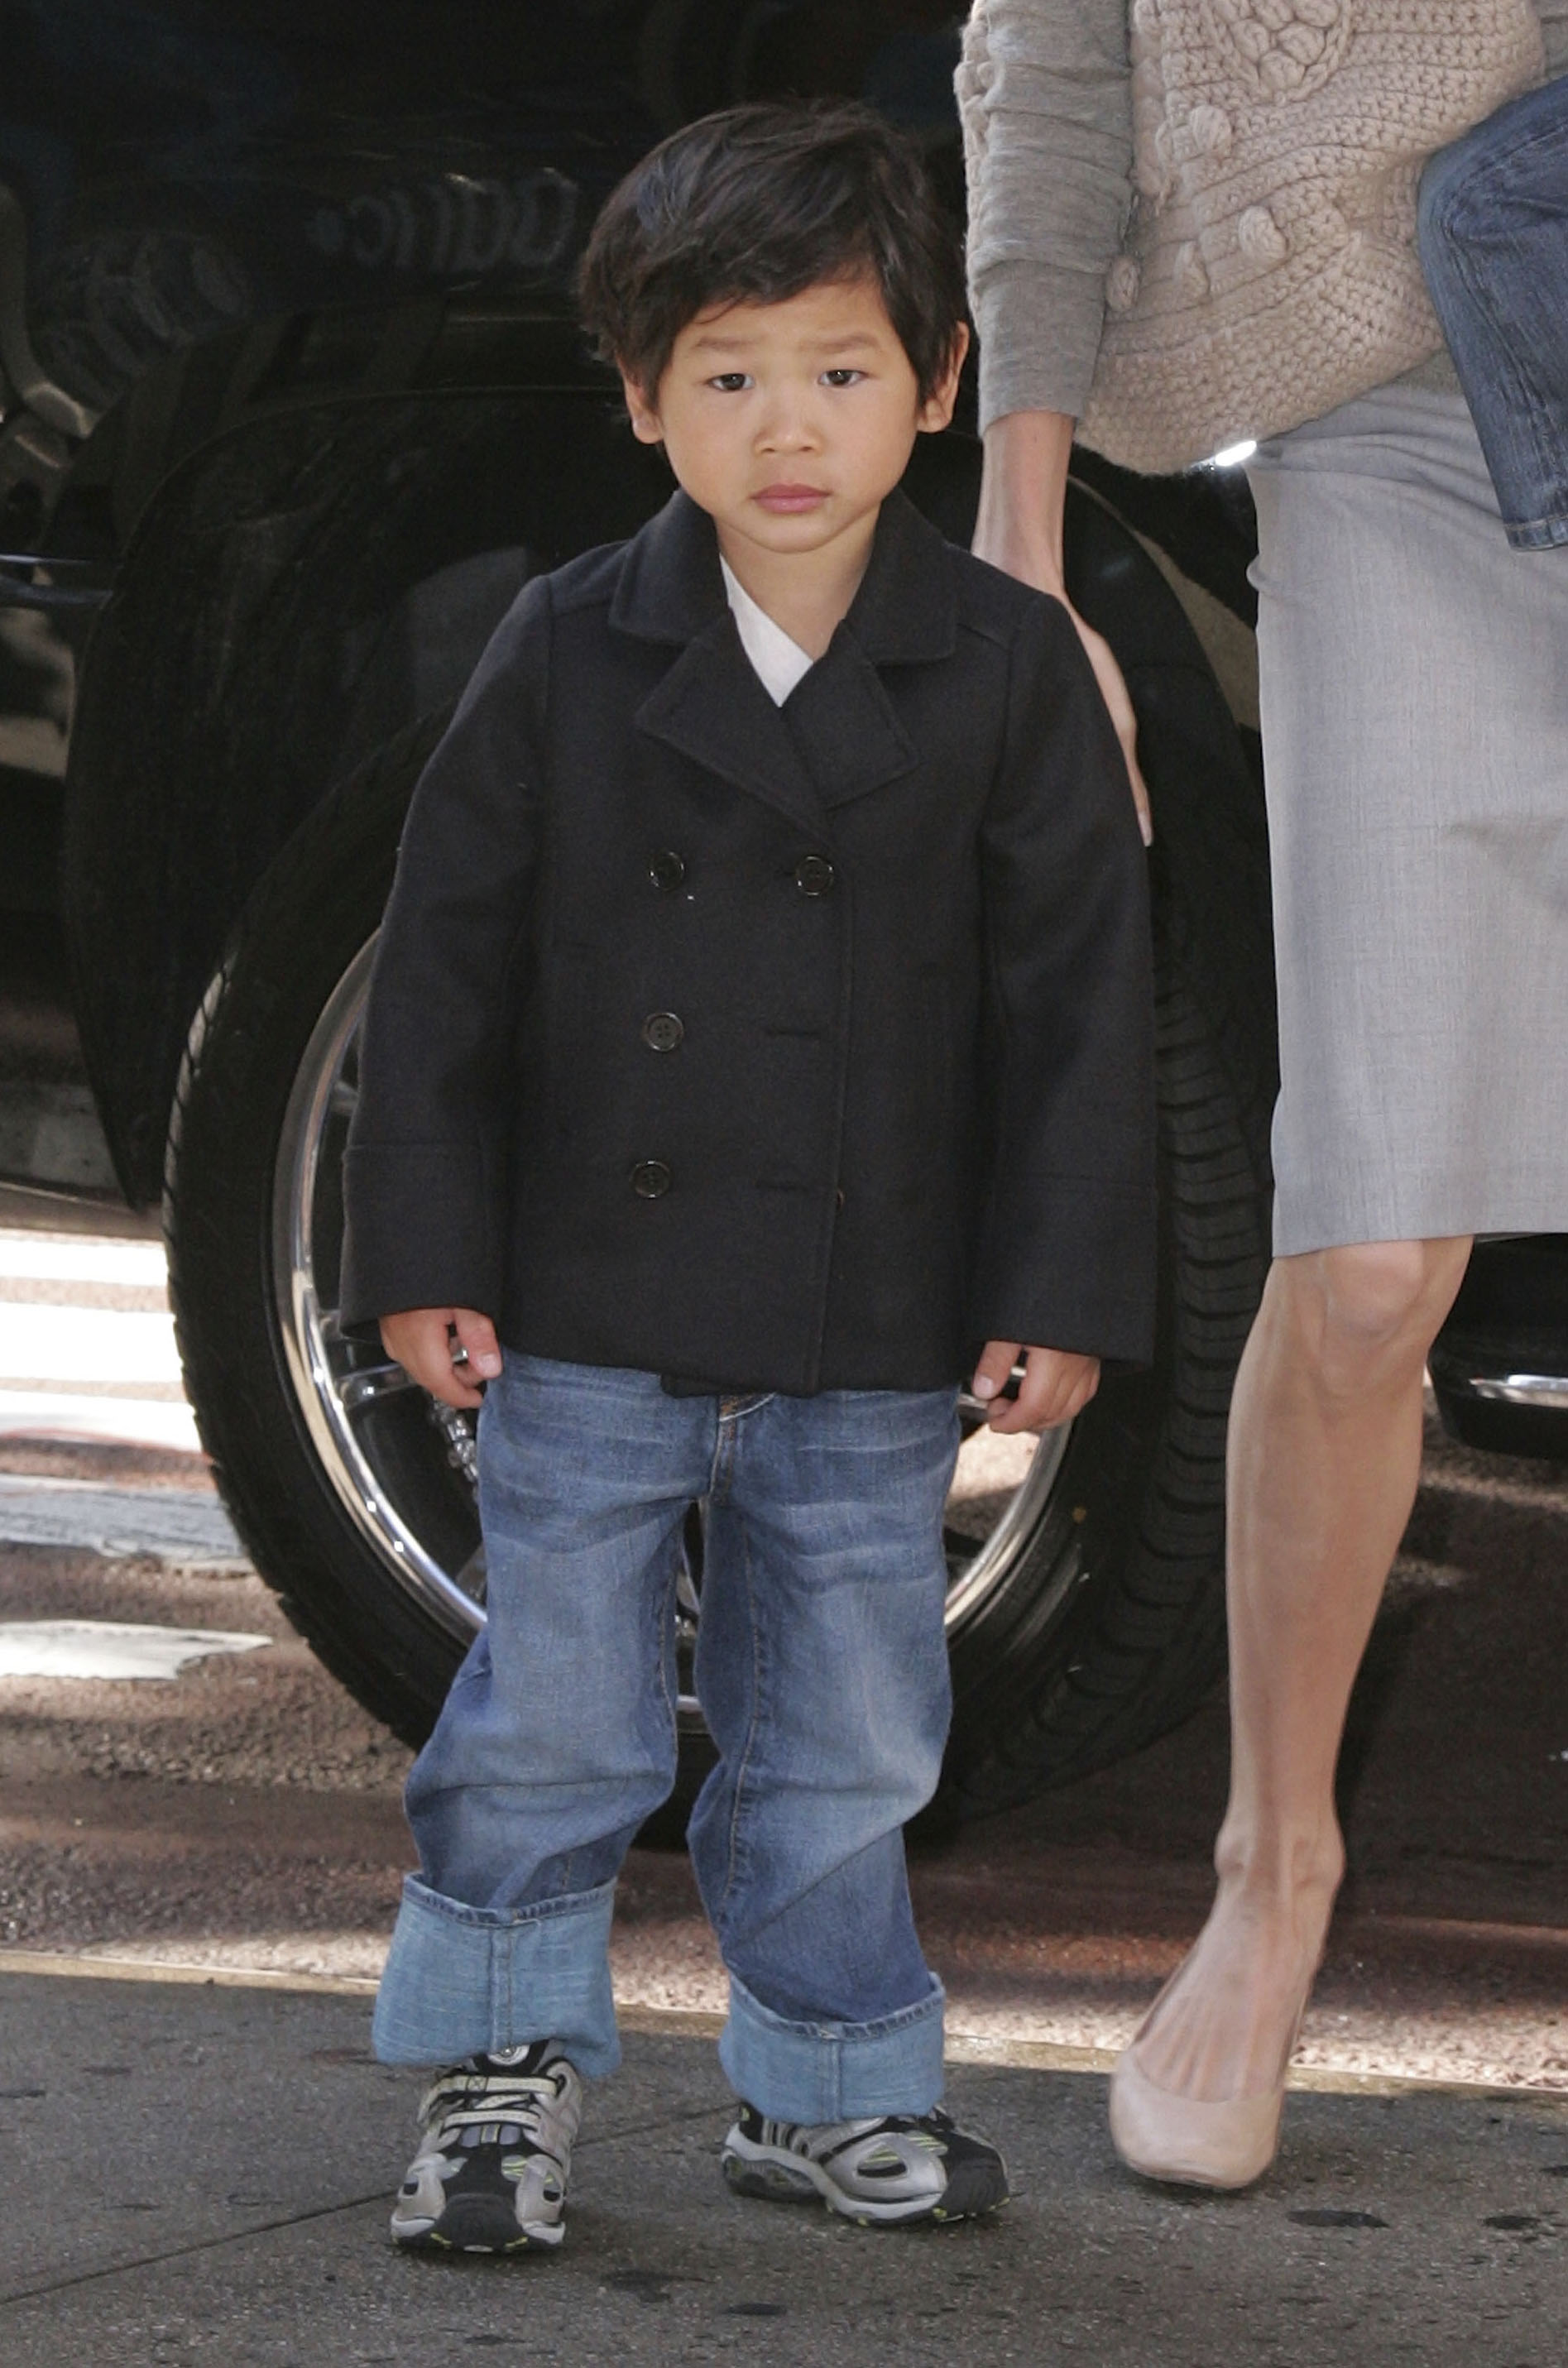 Pax Jolie-Pitt in New York City on September 20, 2007 | Source: Getty Images